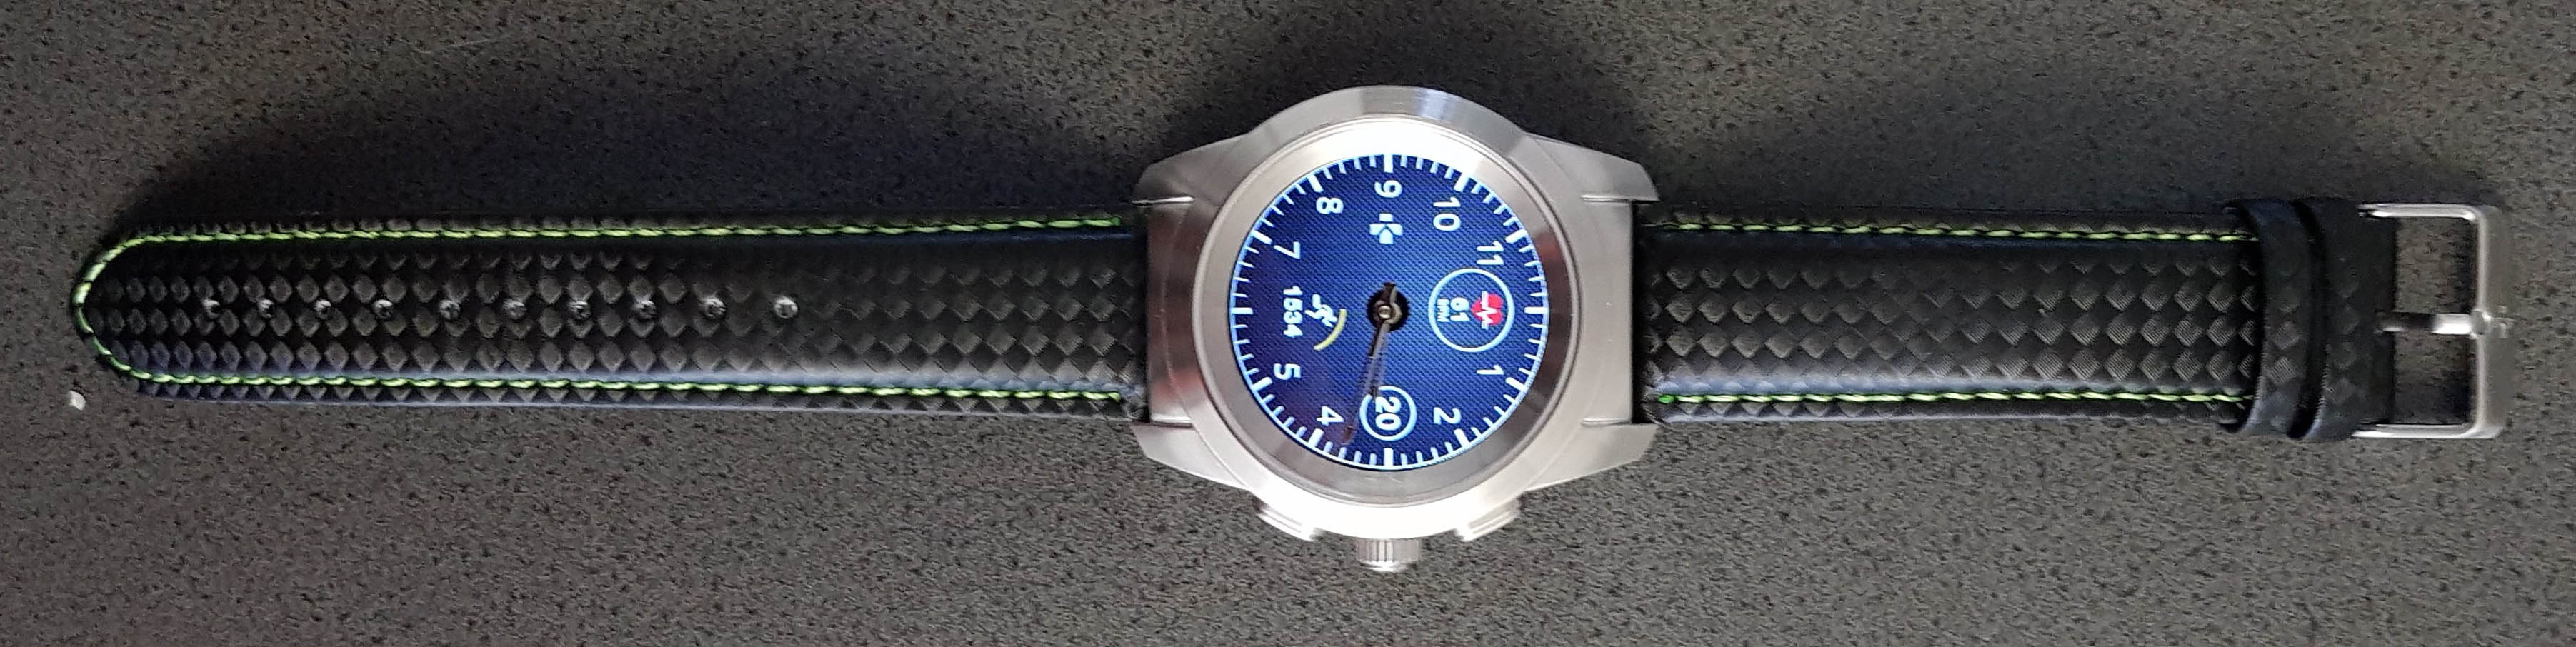 zetime watch review